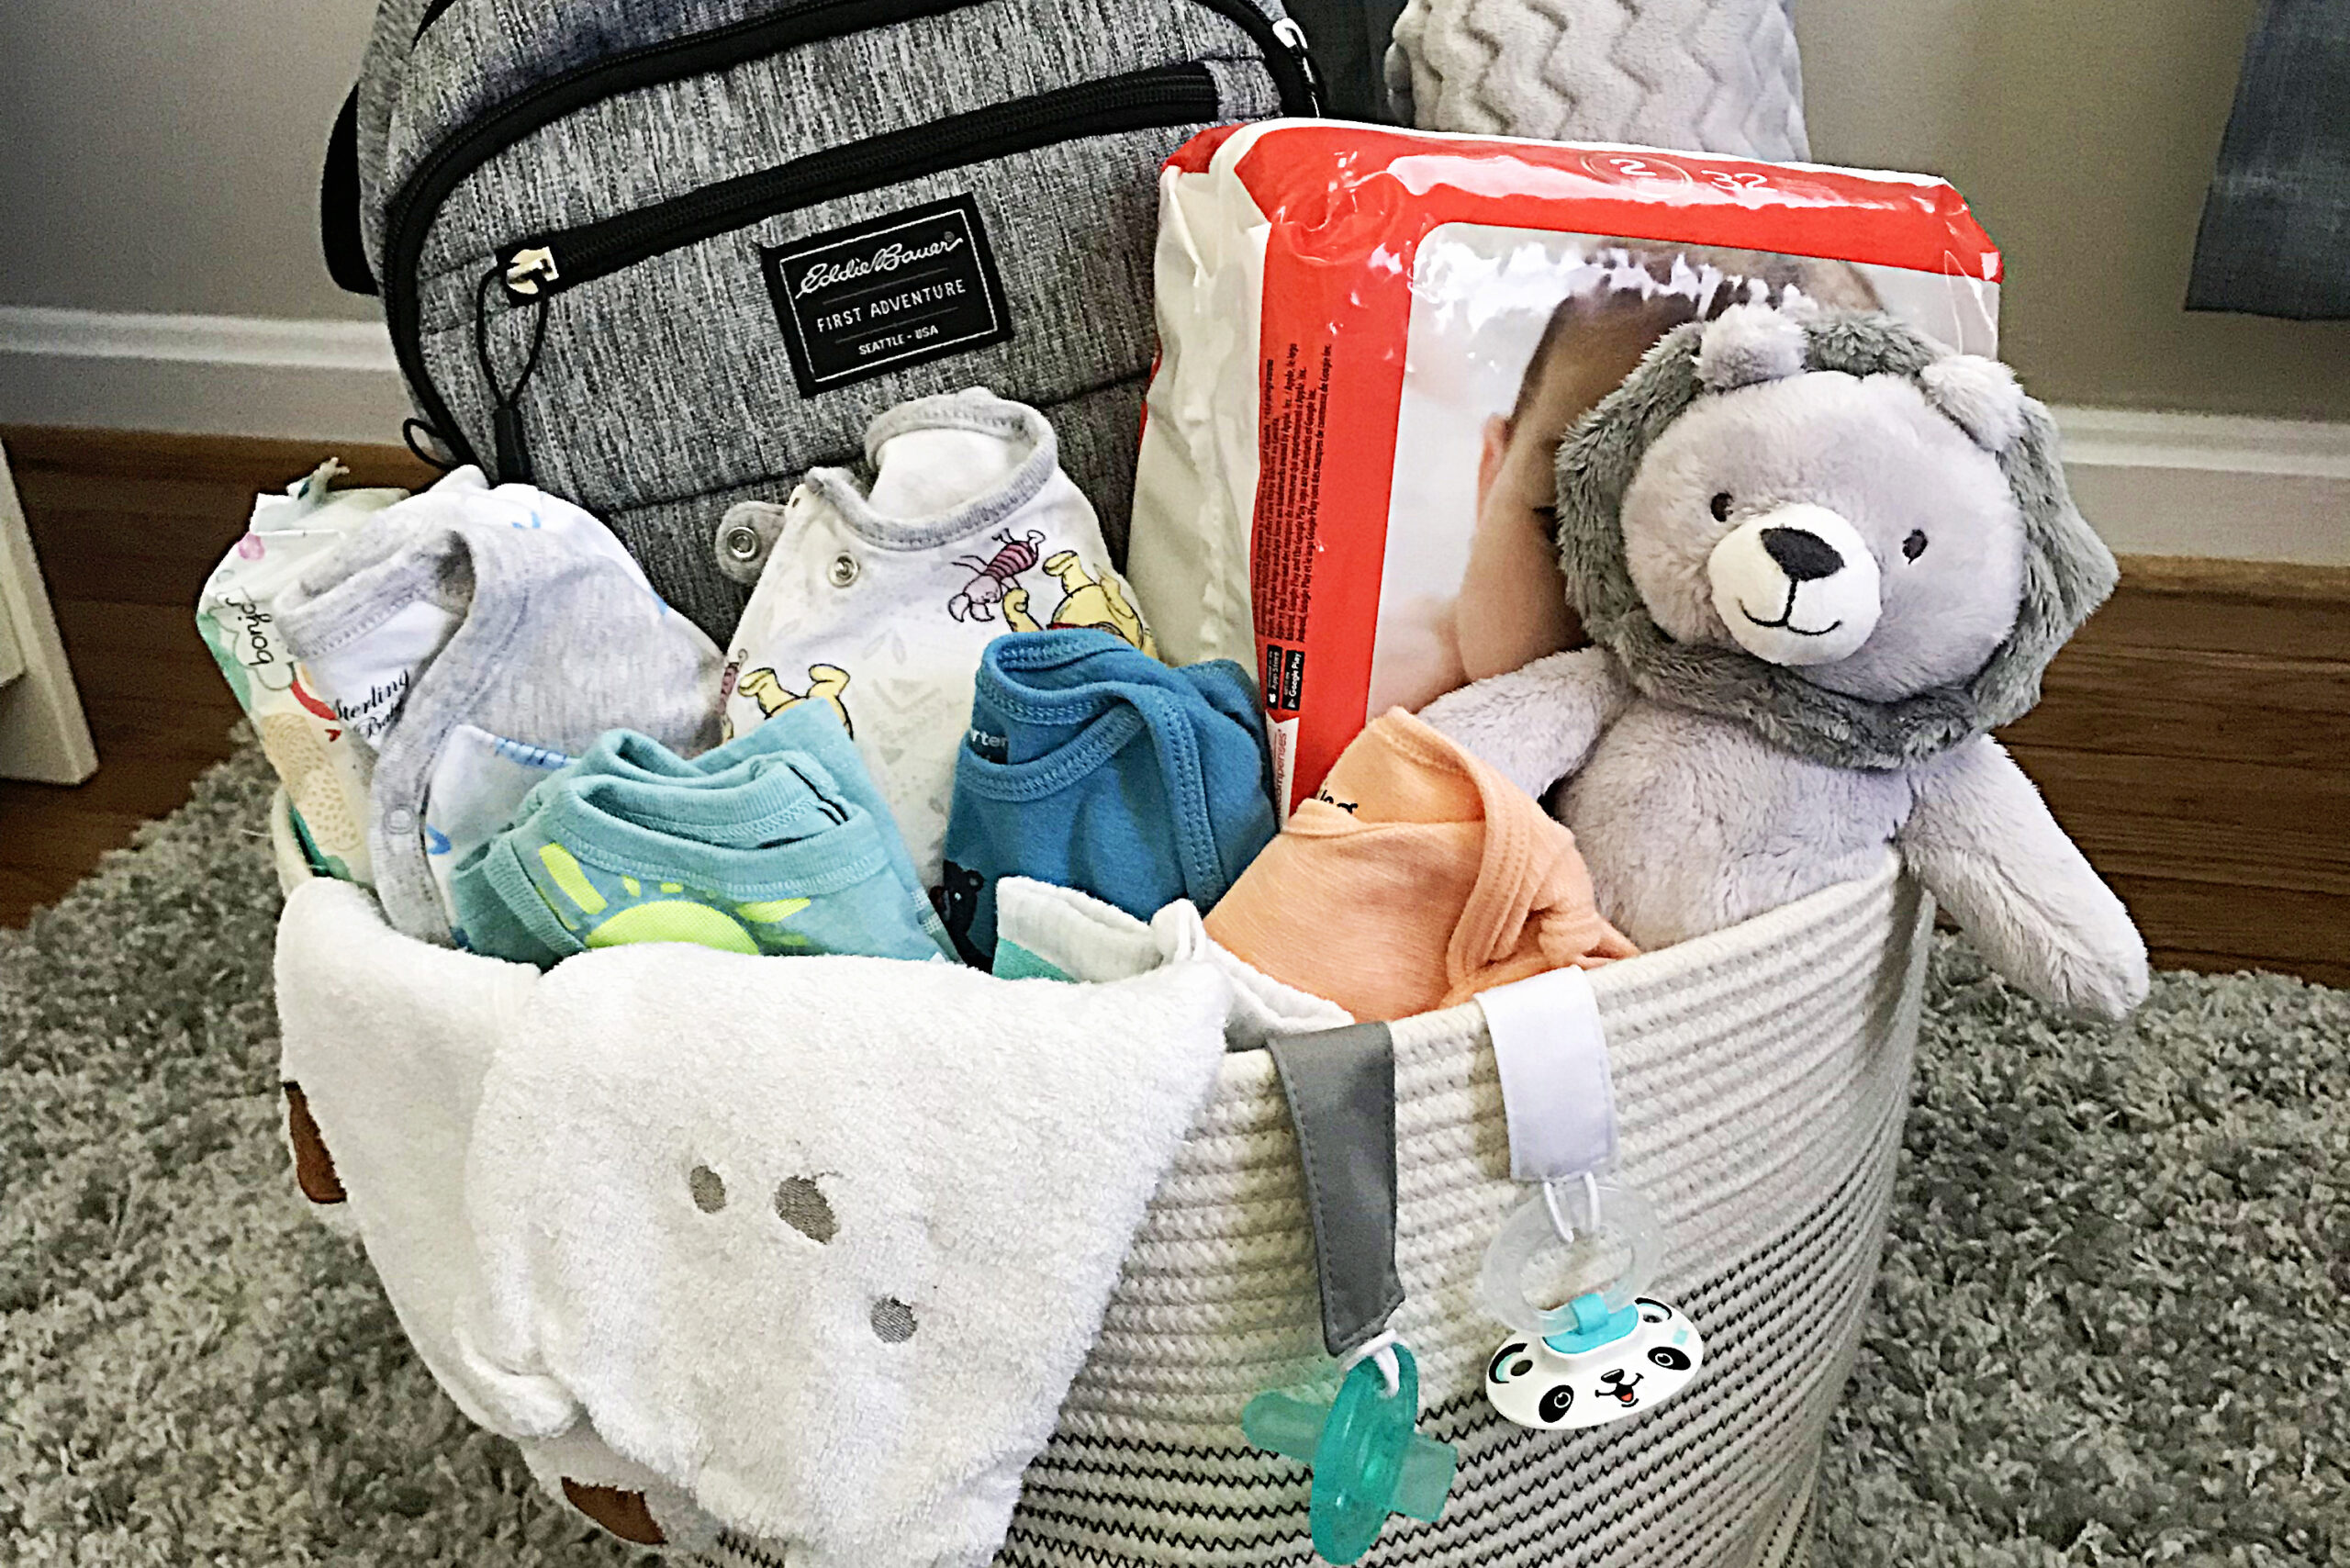 Free Baby Supplies For Local Moms - Alcove Health Women's Clinic